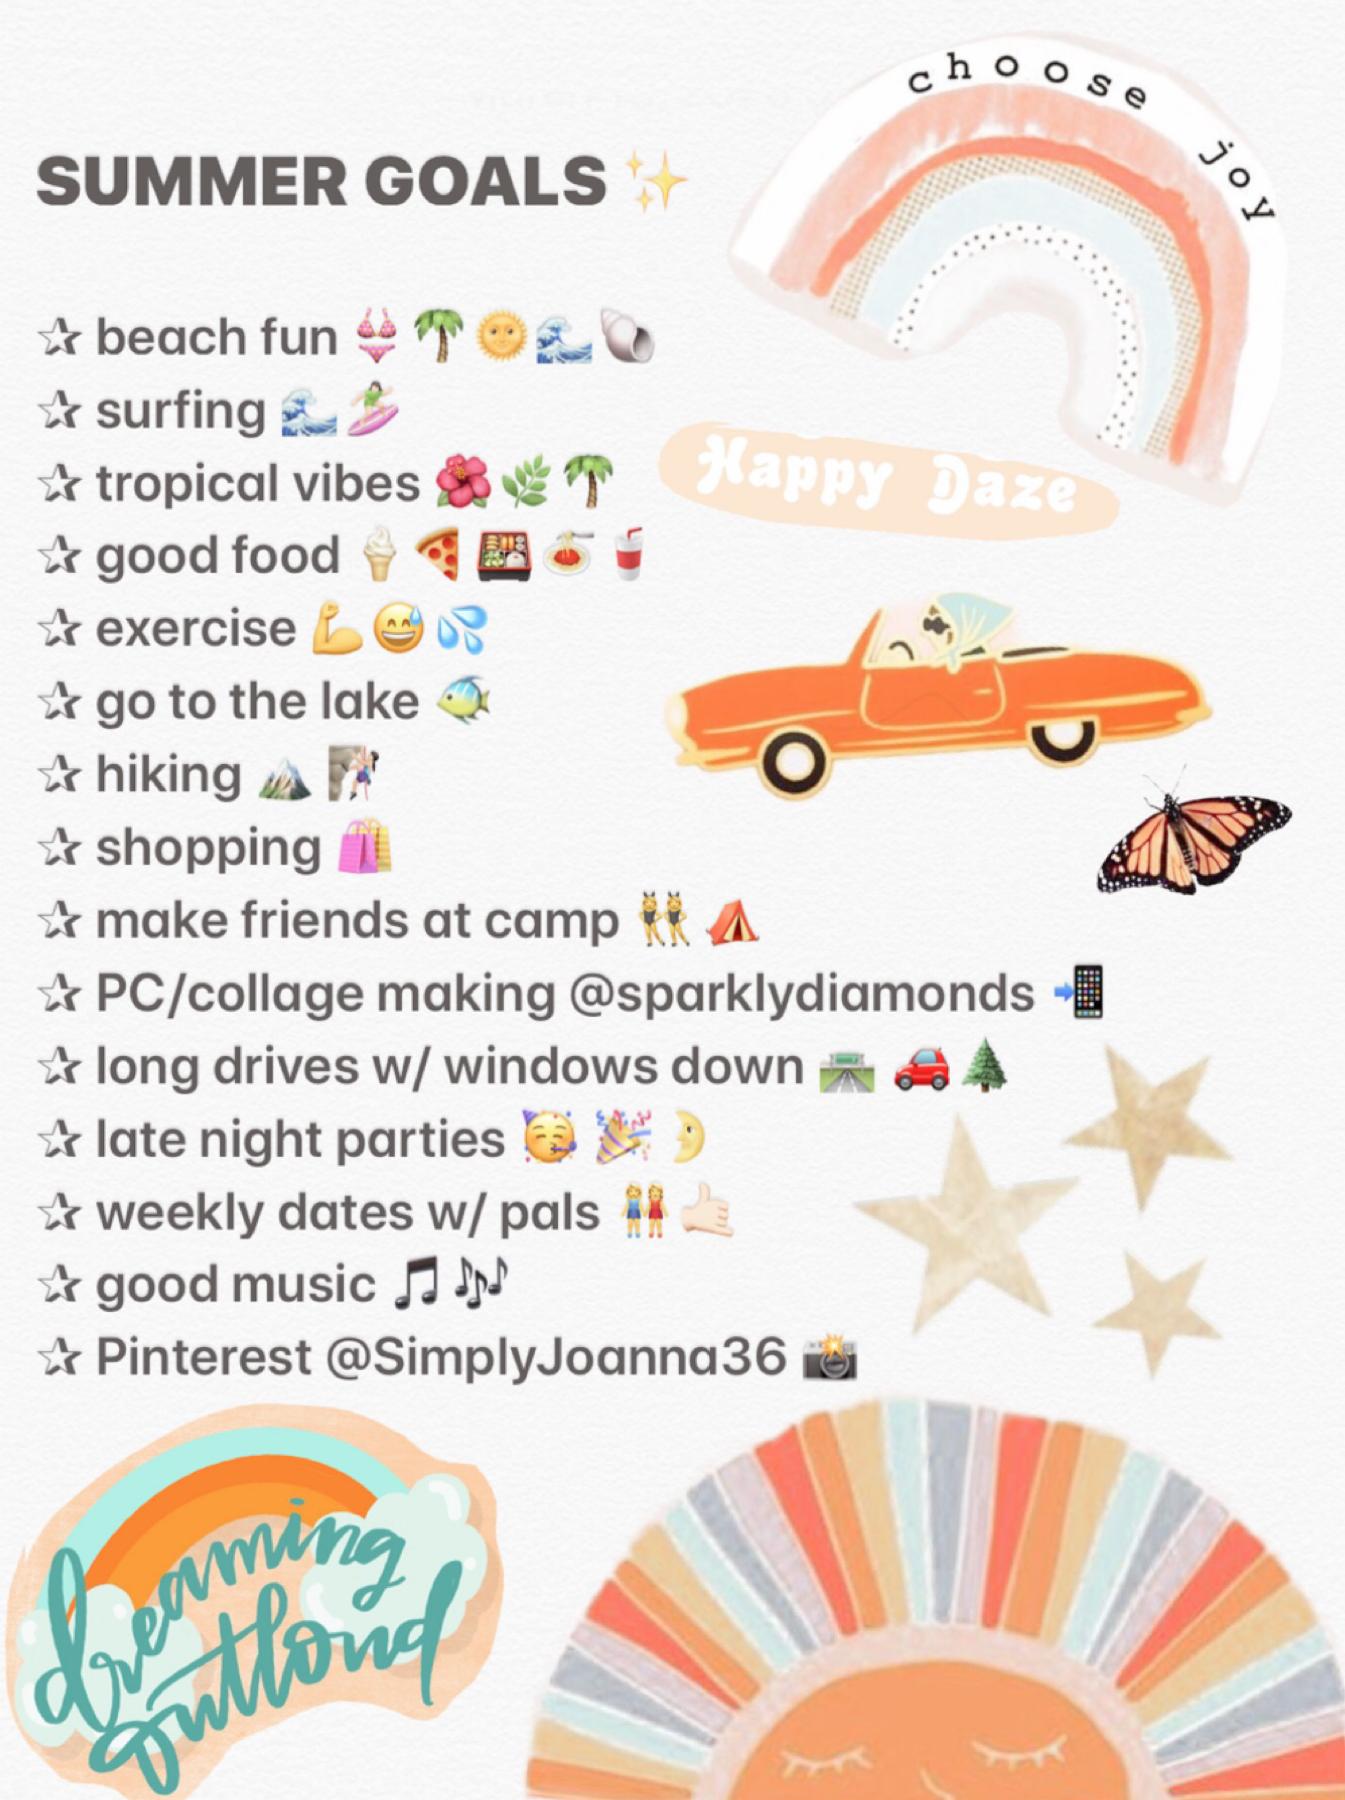 This are my goals for this summer :) I really wish I can do all of these things //